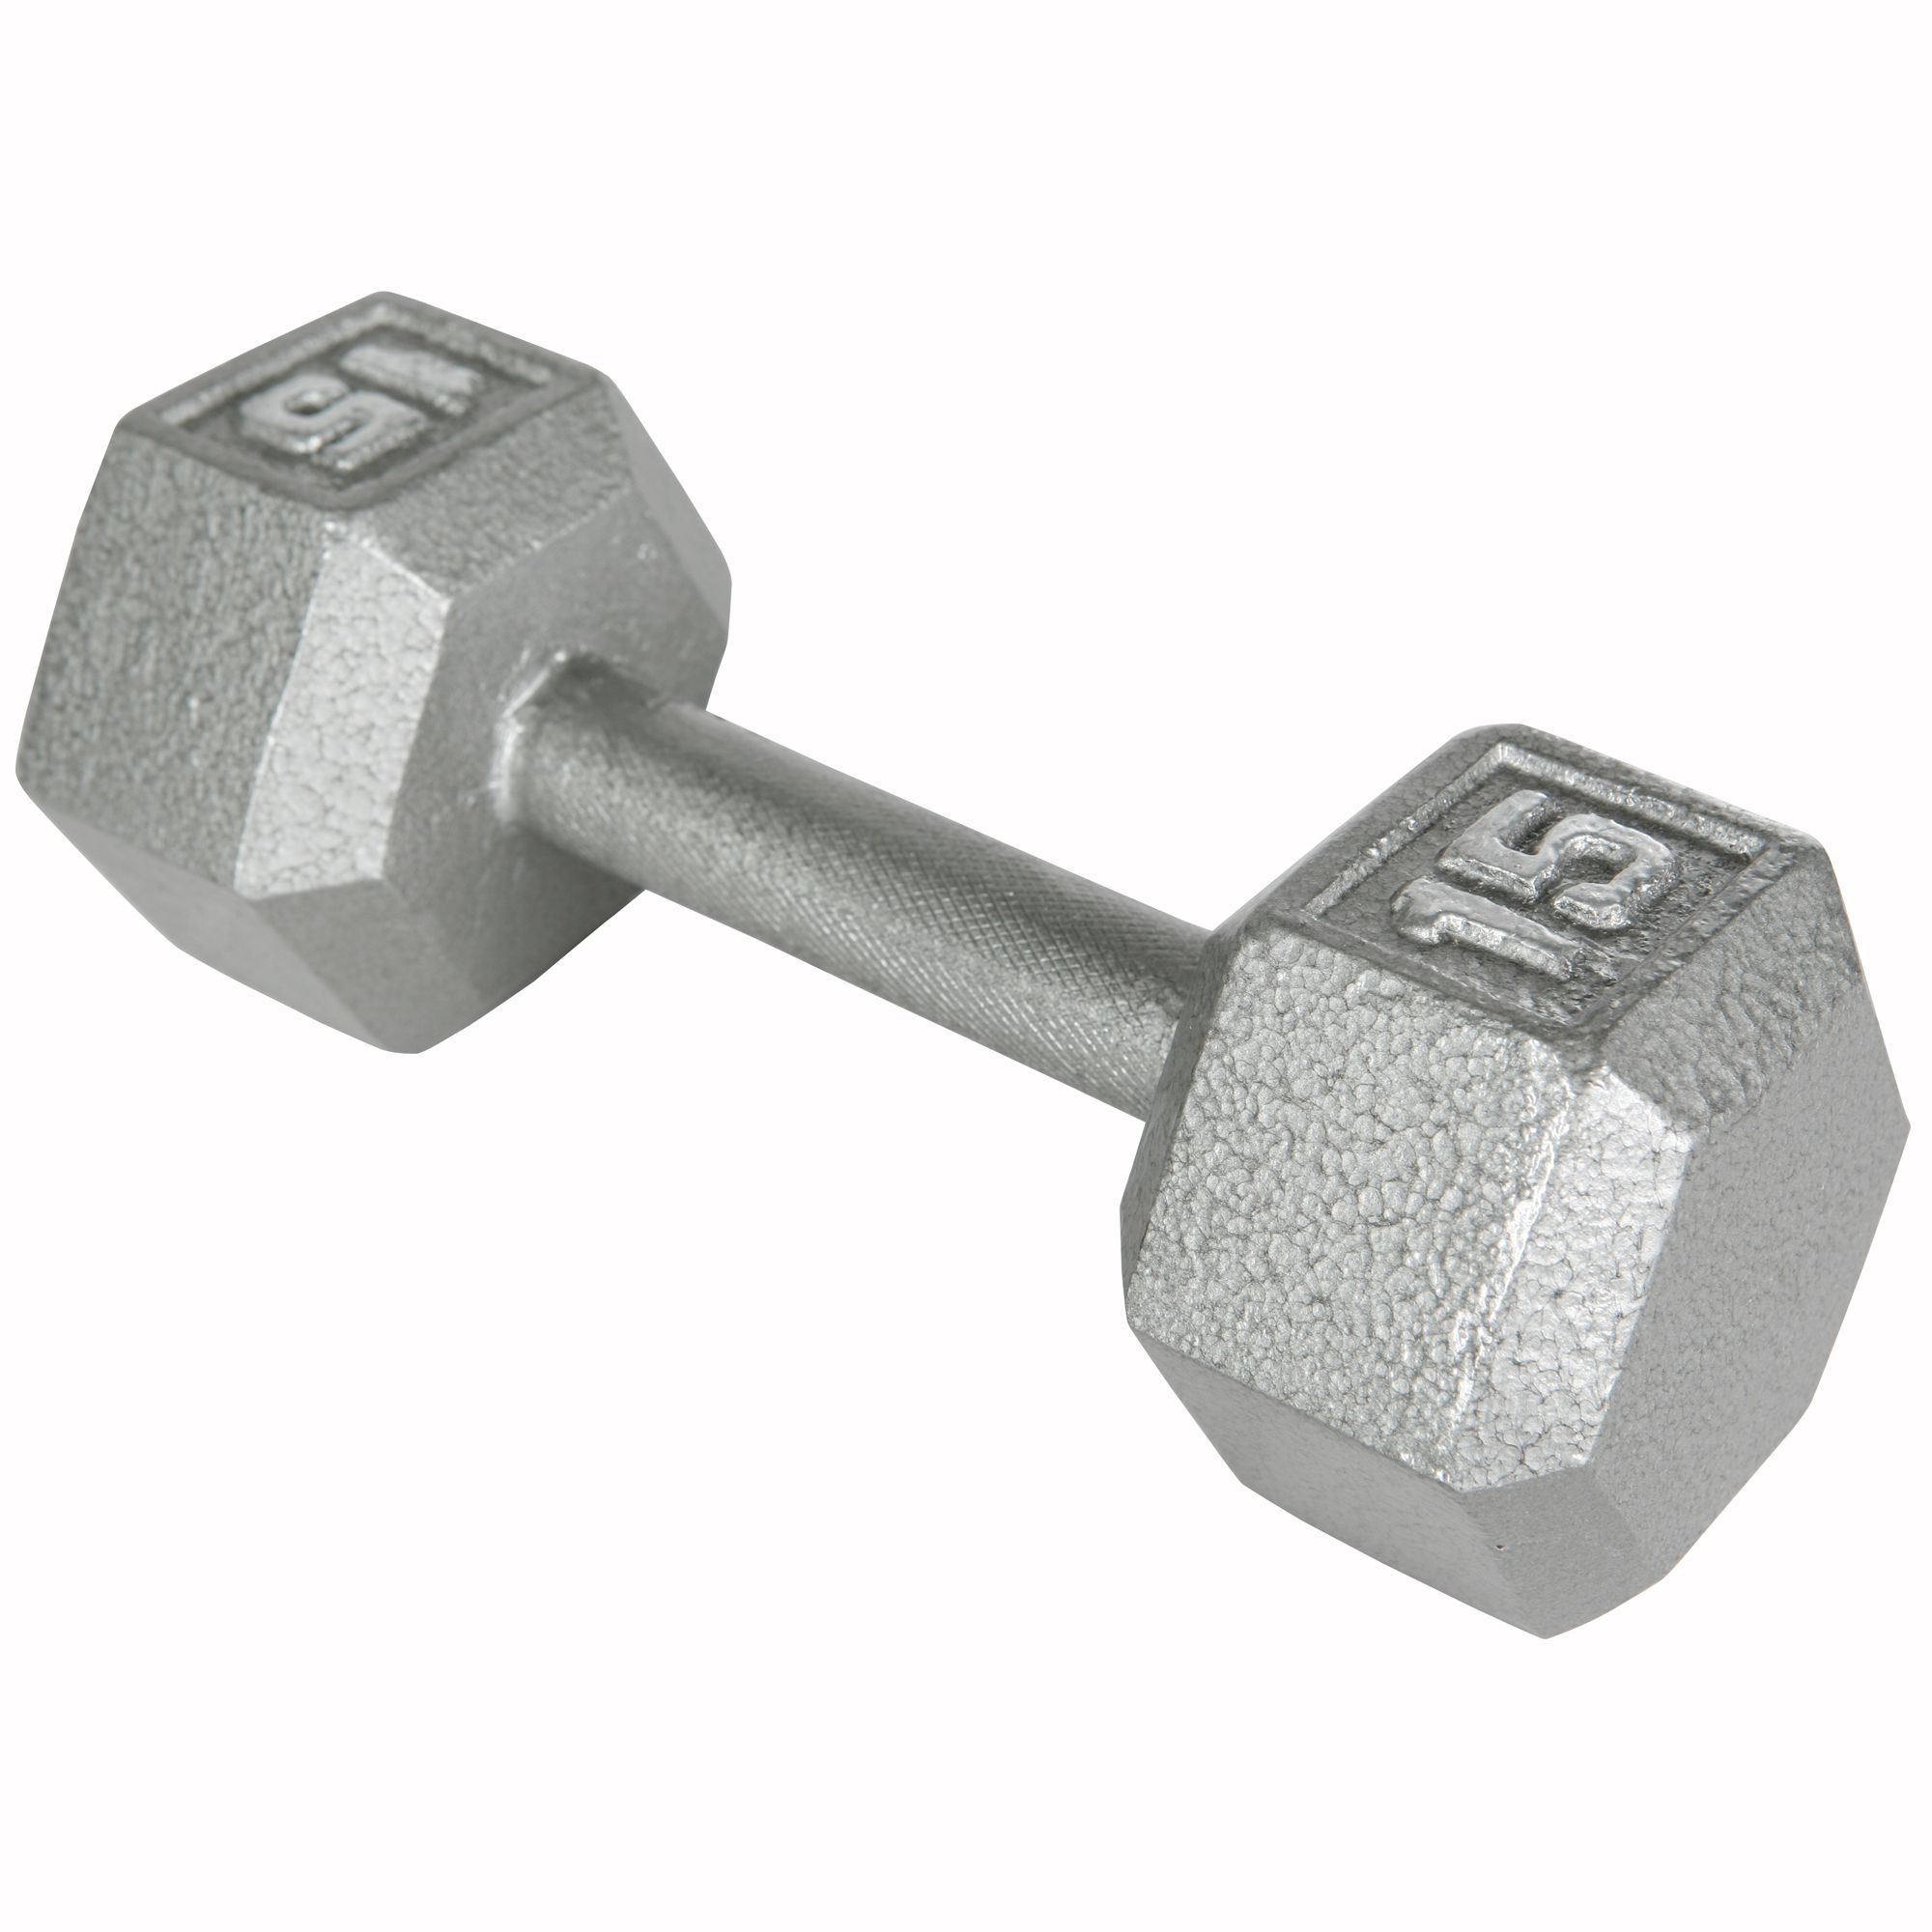 Weider NHD15 15 lb. Hex Dumbbell | Shop Your Way: Online Shopping \u0026 Earn Points on Tools ...